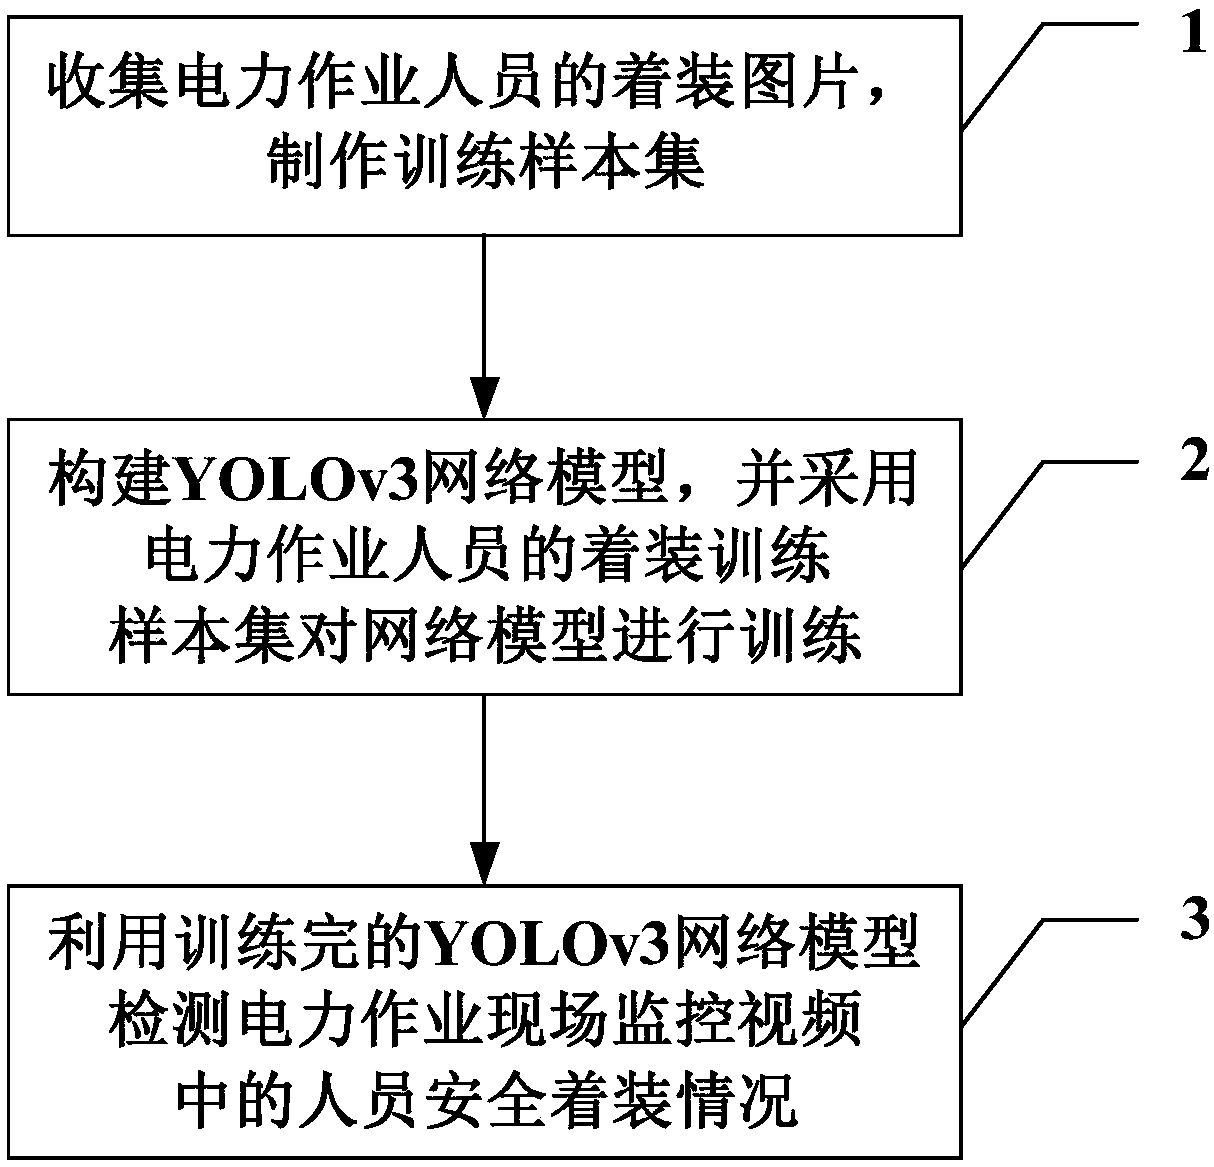 Electric power operation personnel safety dressing detection method based on YOLOv3 target detection